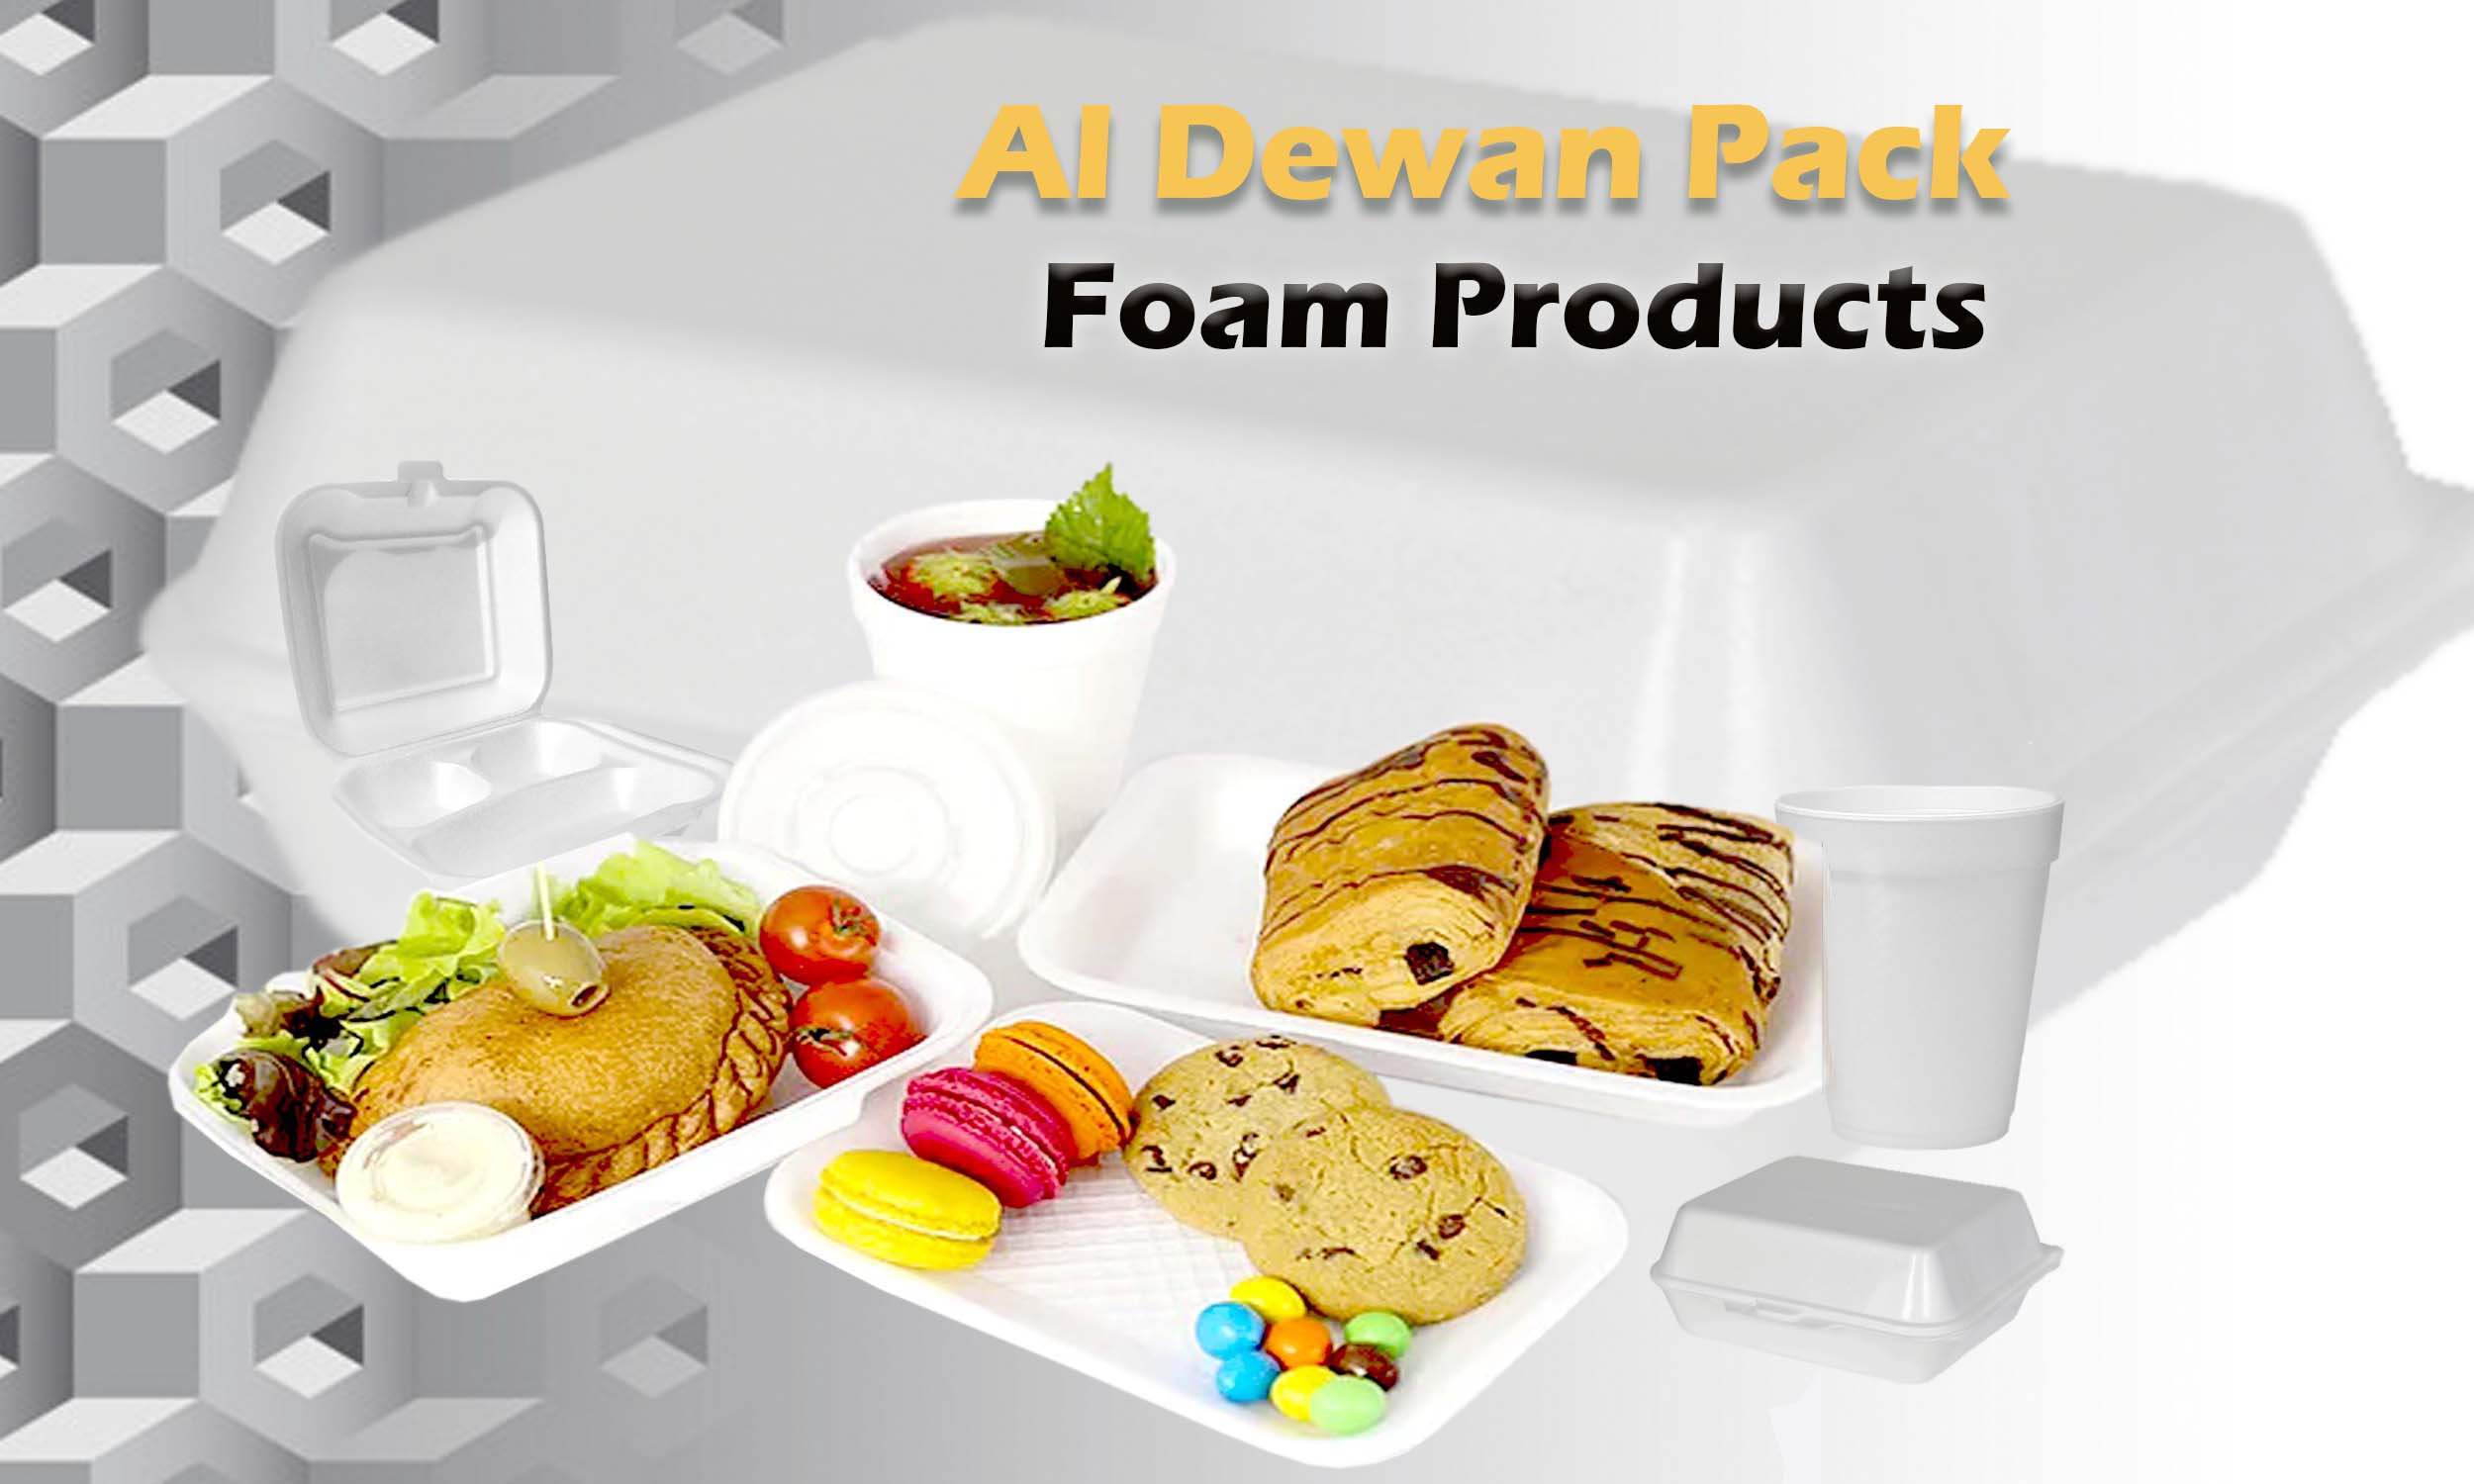 Foam Products